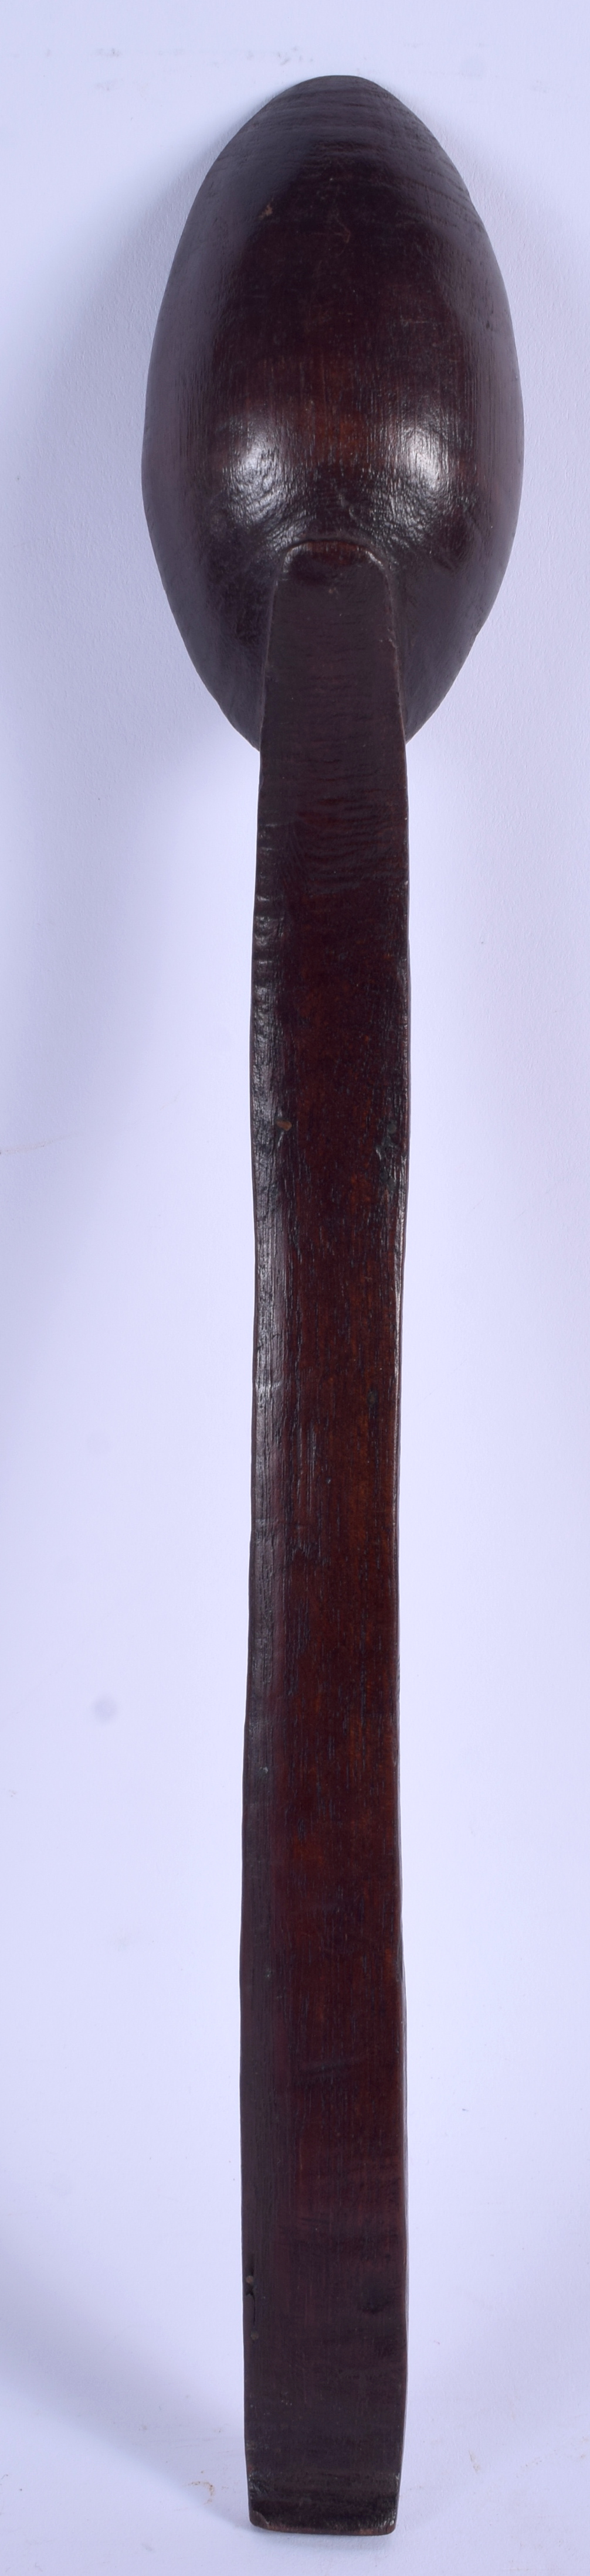 AN EARLY 20TH CENTURY CONTINENTAL CARVED WOOD ZIG ZAG SPOON. 34 cm long. - Image 2 of 2